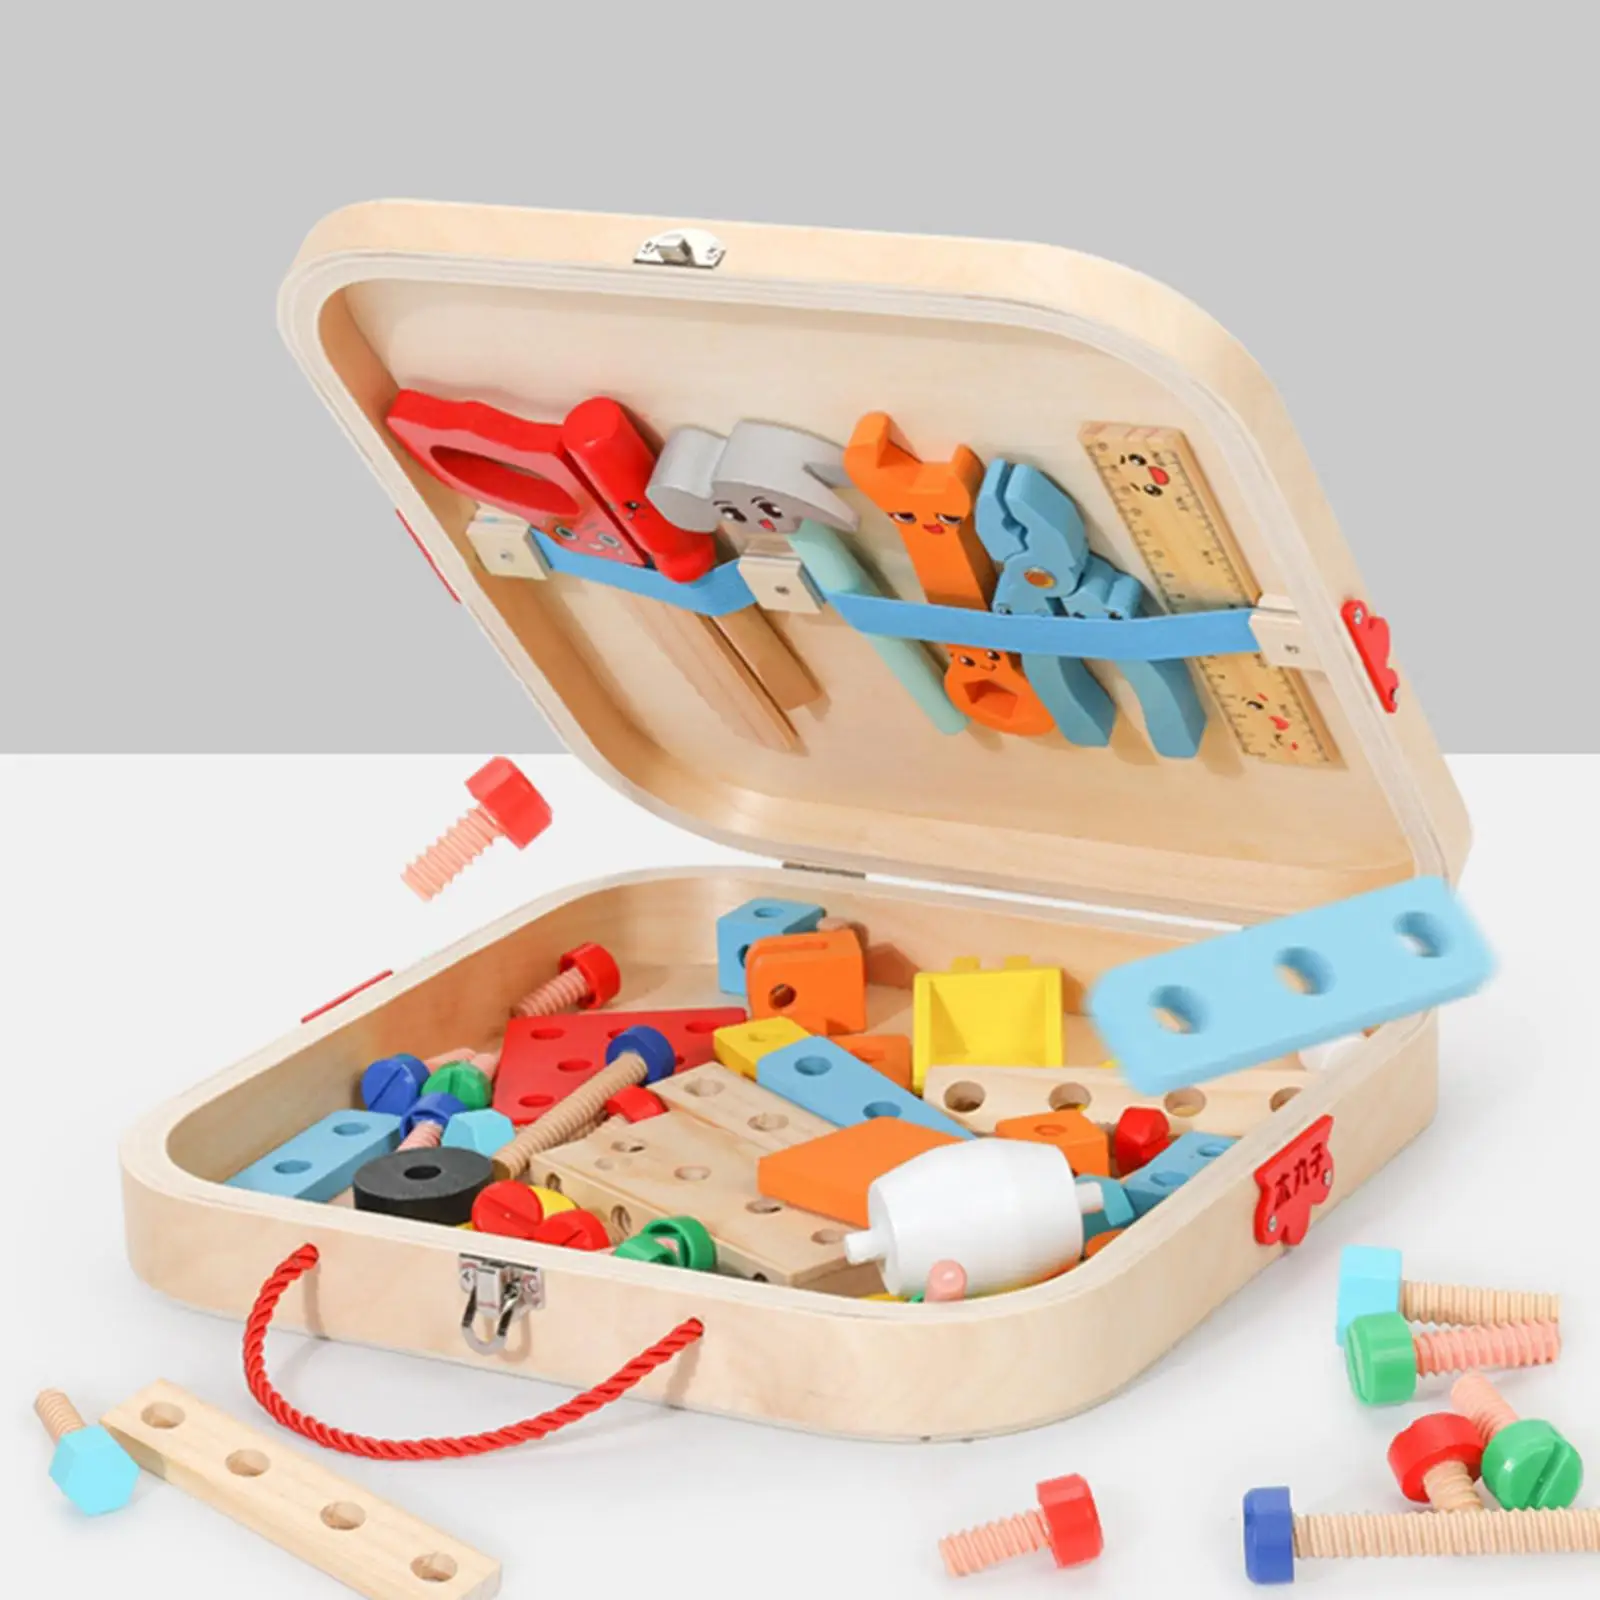 Wooden Kid Tool Set Wooden Toy Tools Box Tool Construction Set Pretend Smooth Construction Tool Toy Set for Living Room